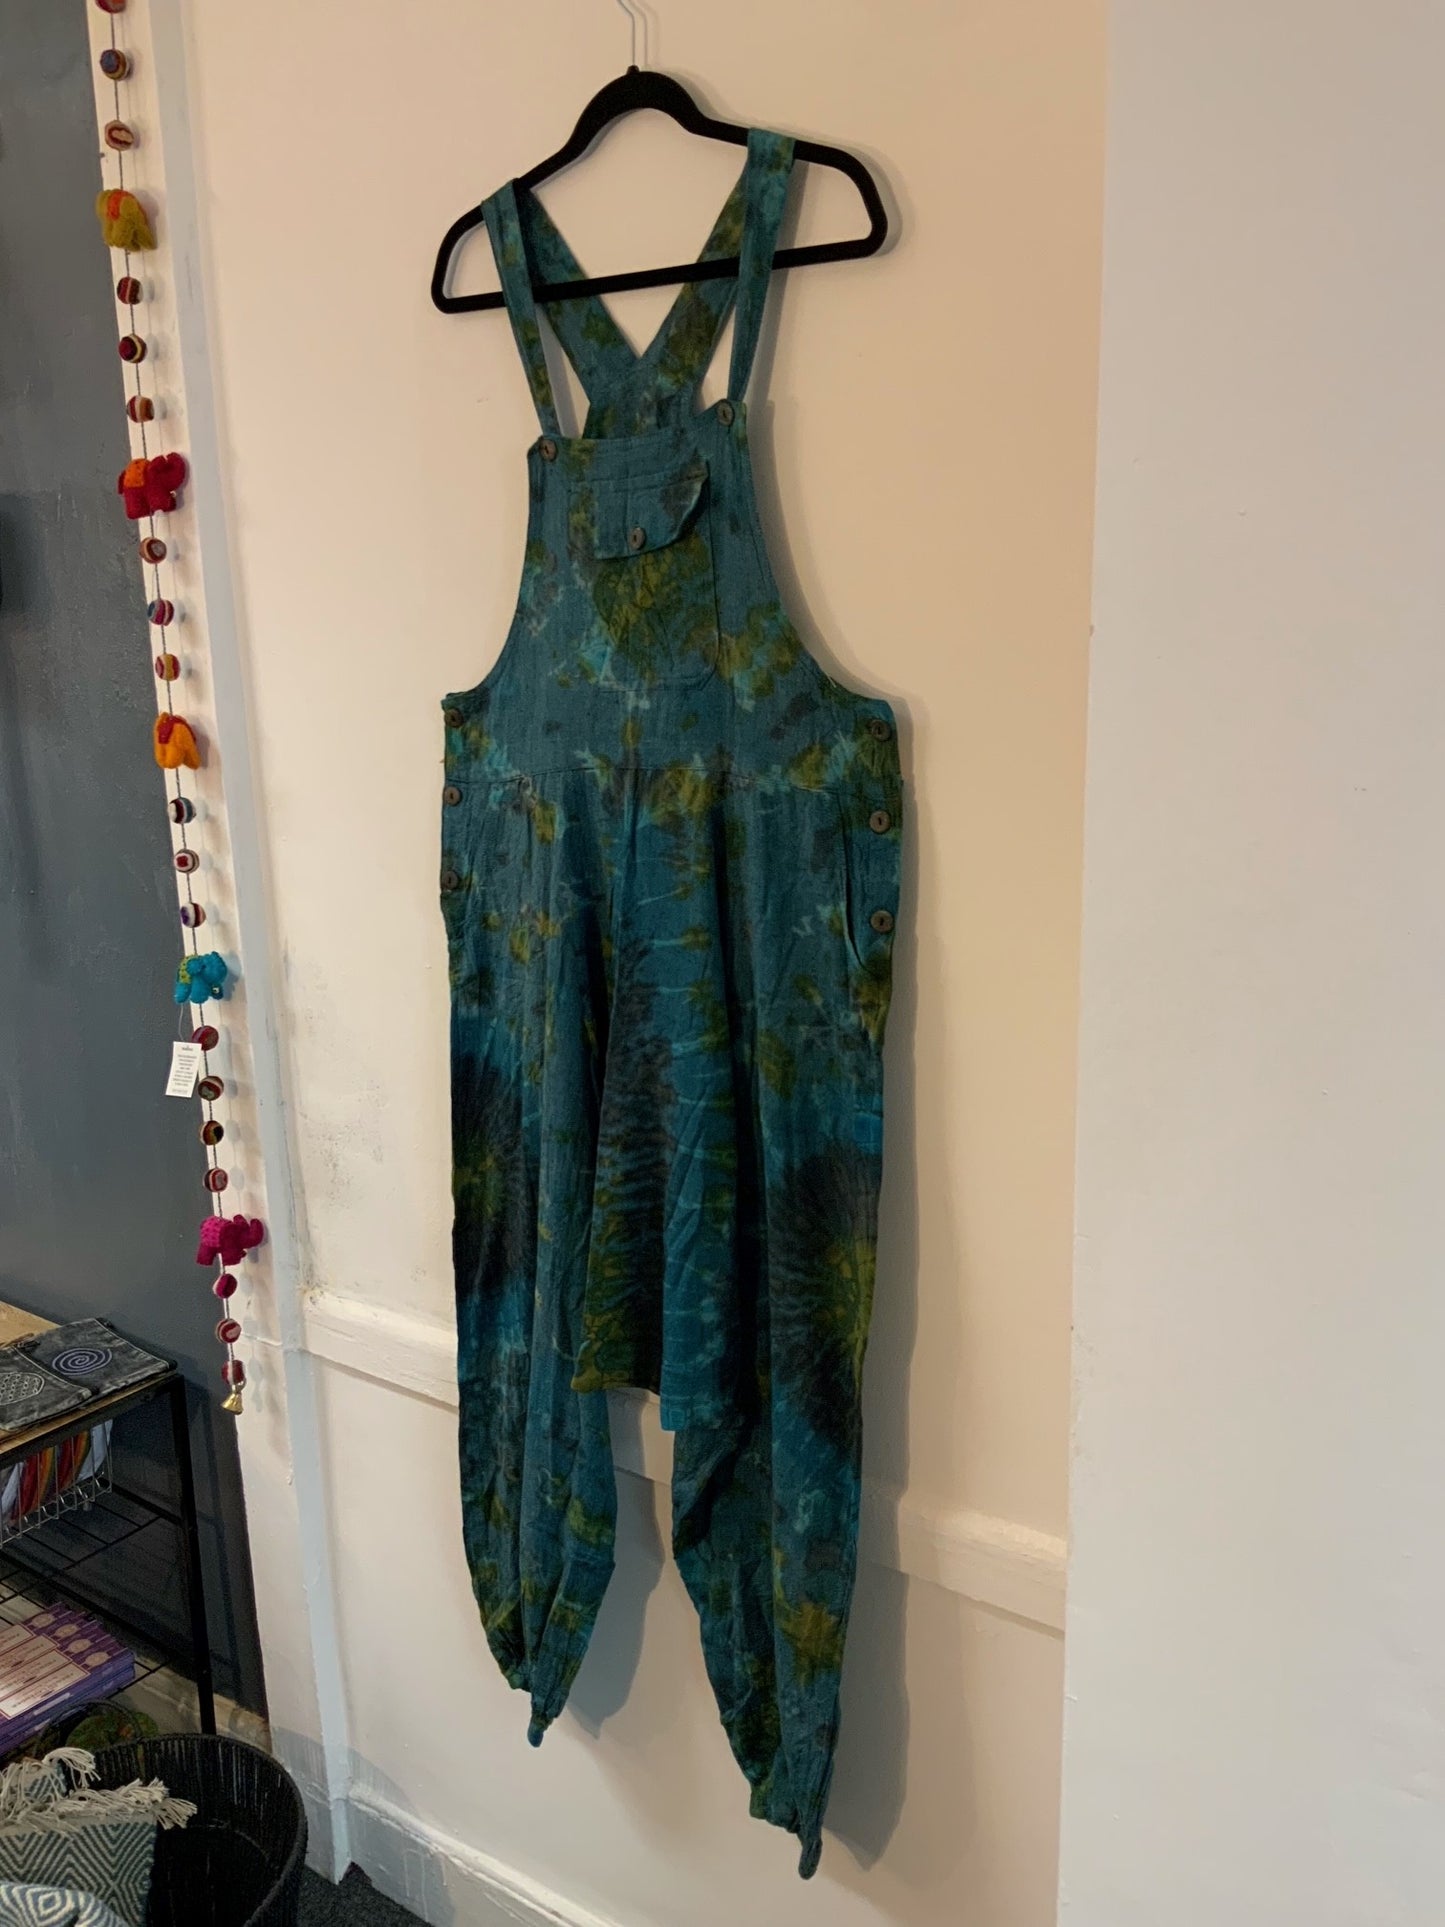 Blue and Green Tie Dye Dungarees